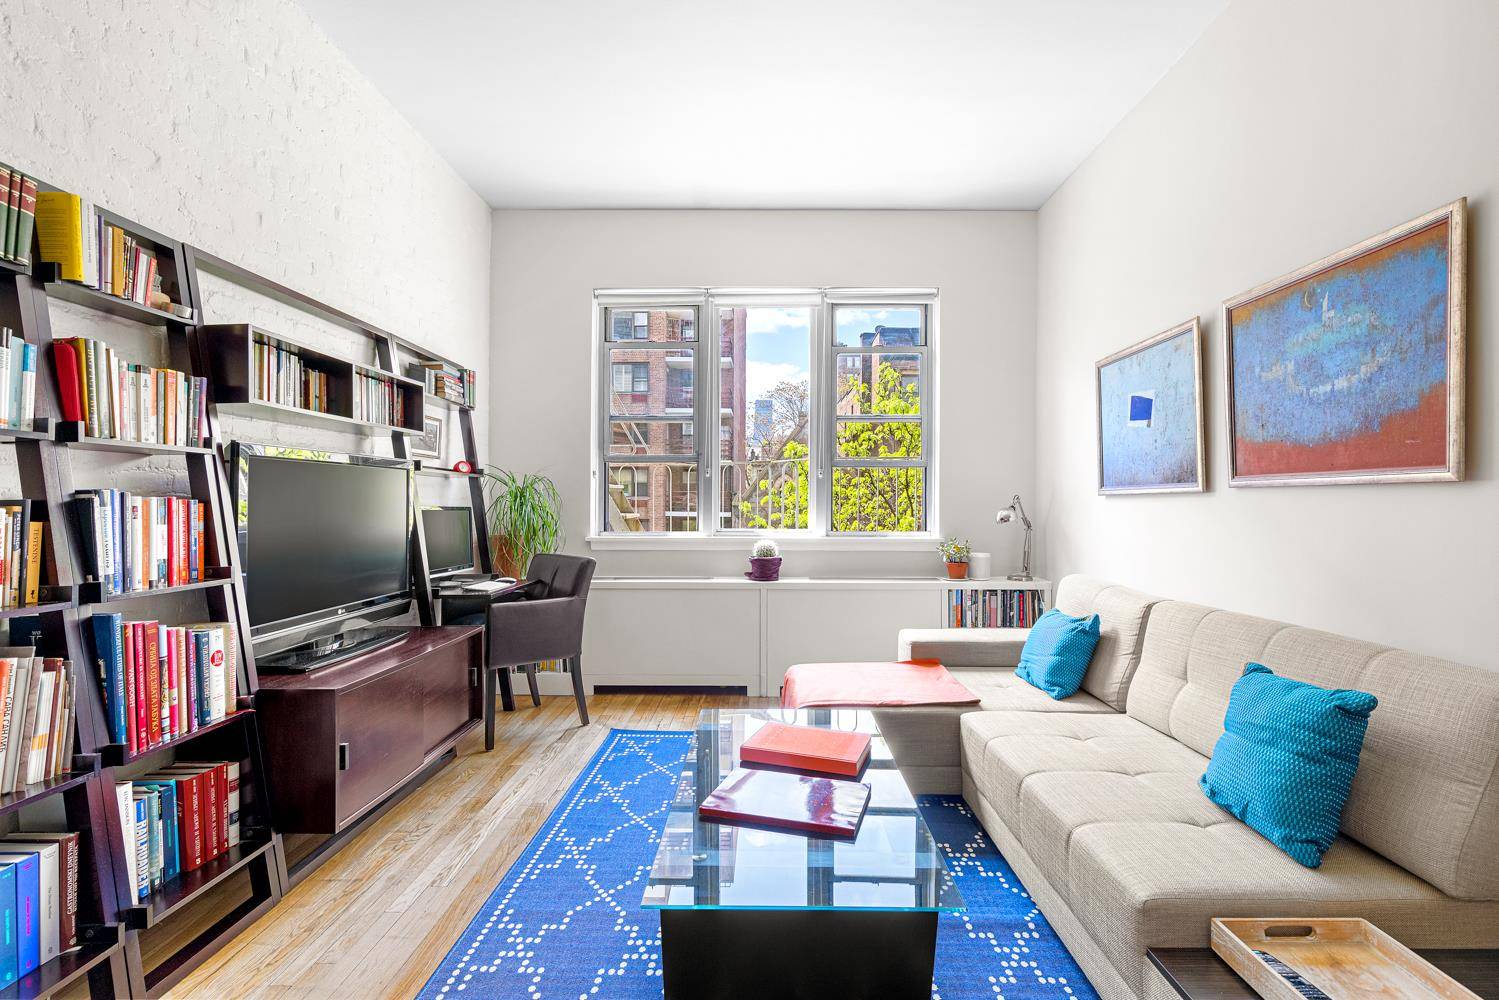 June 1st Move InElevator BuildingNo PetsThis stylish, spacious, sun filled, south facing one bedroom with 10' ceilings can be your new oasis in the city.